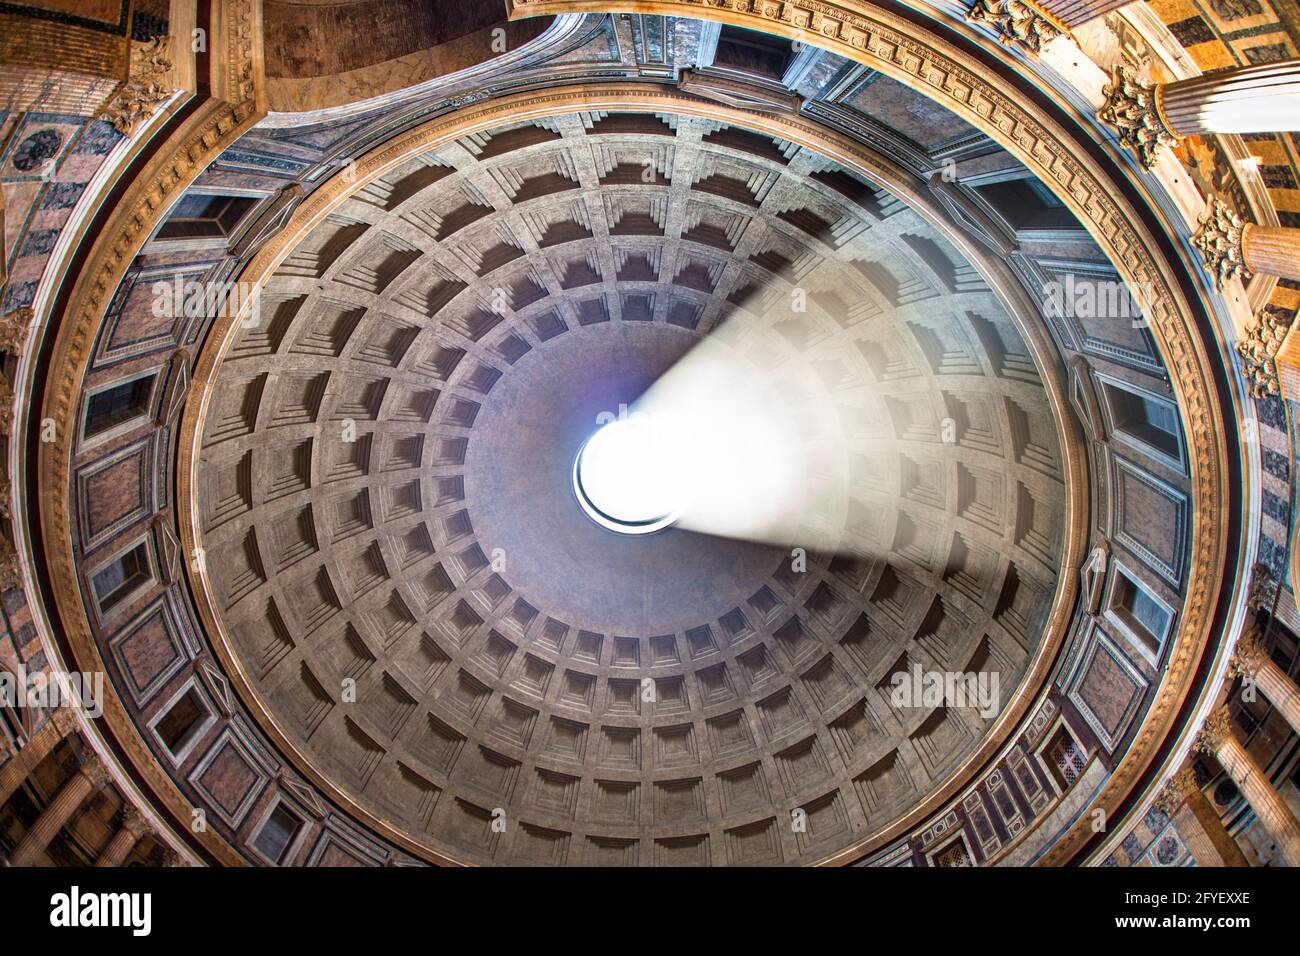 The oculus in the ceiling of the ancient Roman Pantheon, in Rome, Italy Stock Photo